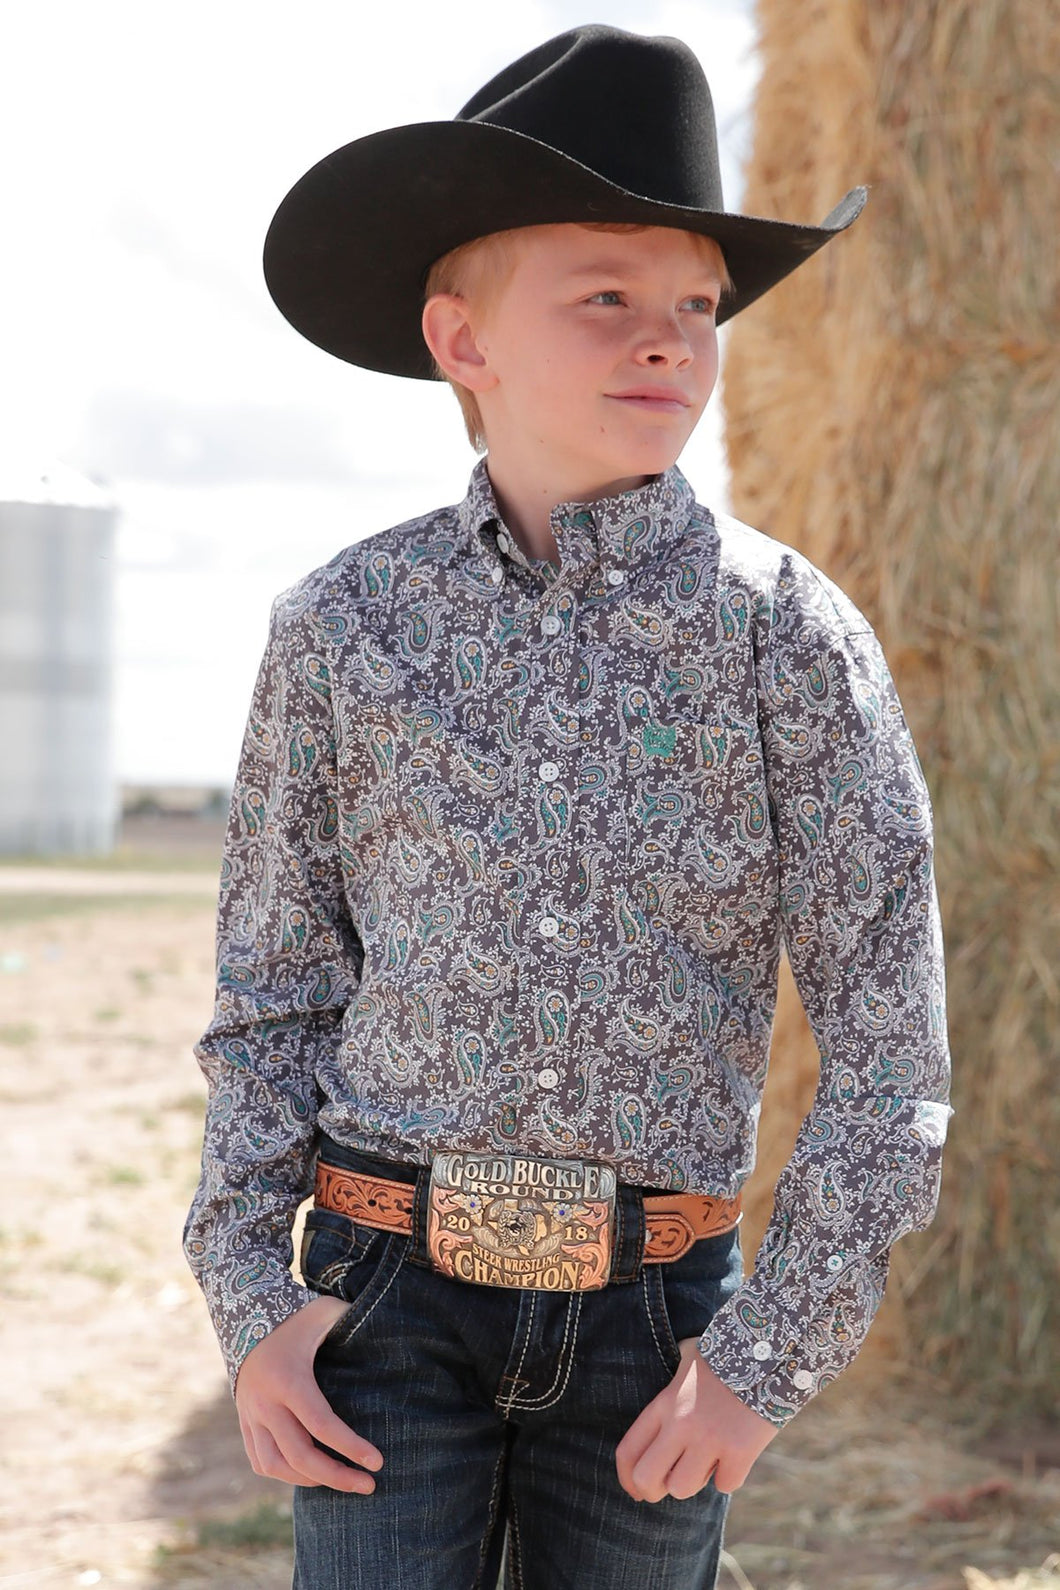 BOY'S MATCH DAD PAISLEY PRINT BUTTON-DOWN WESTERN SHIRT - GRAY / TURQUOISE